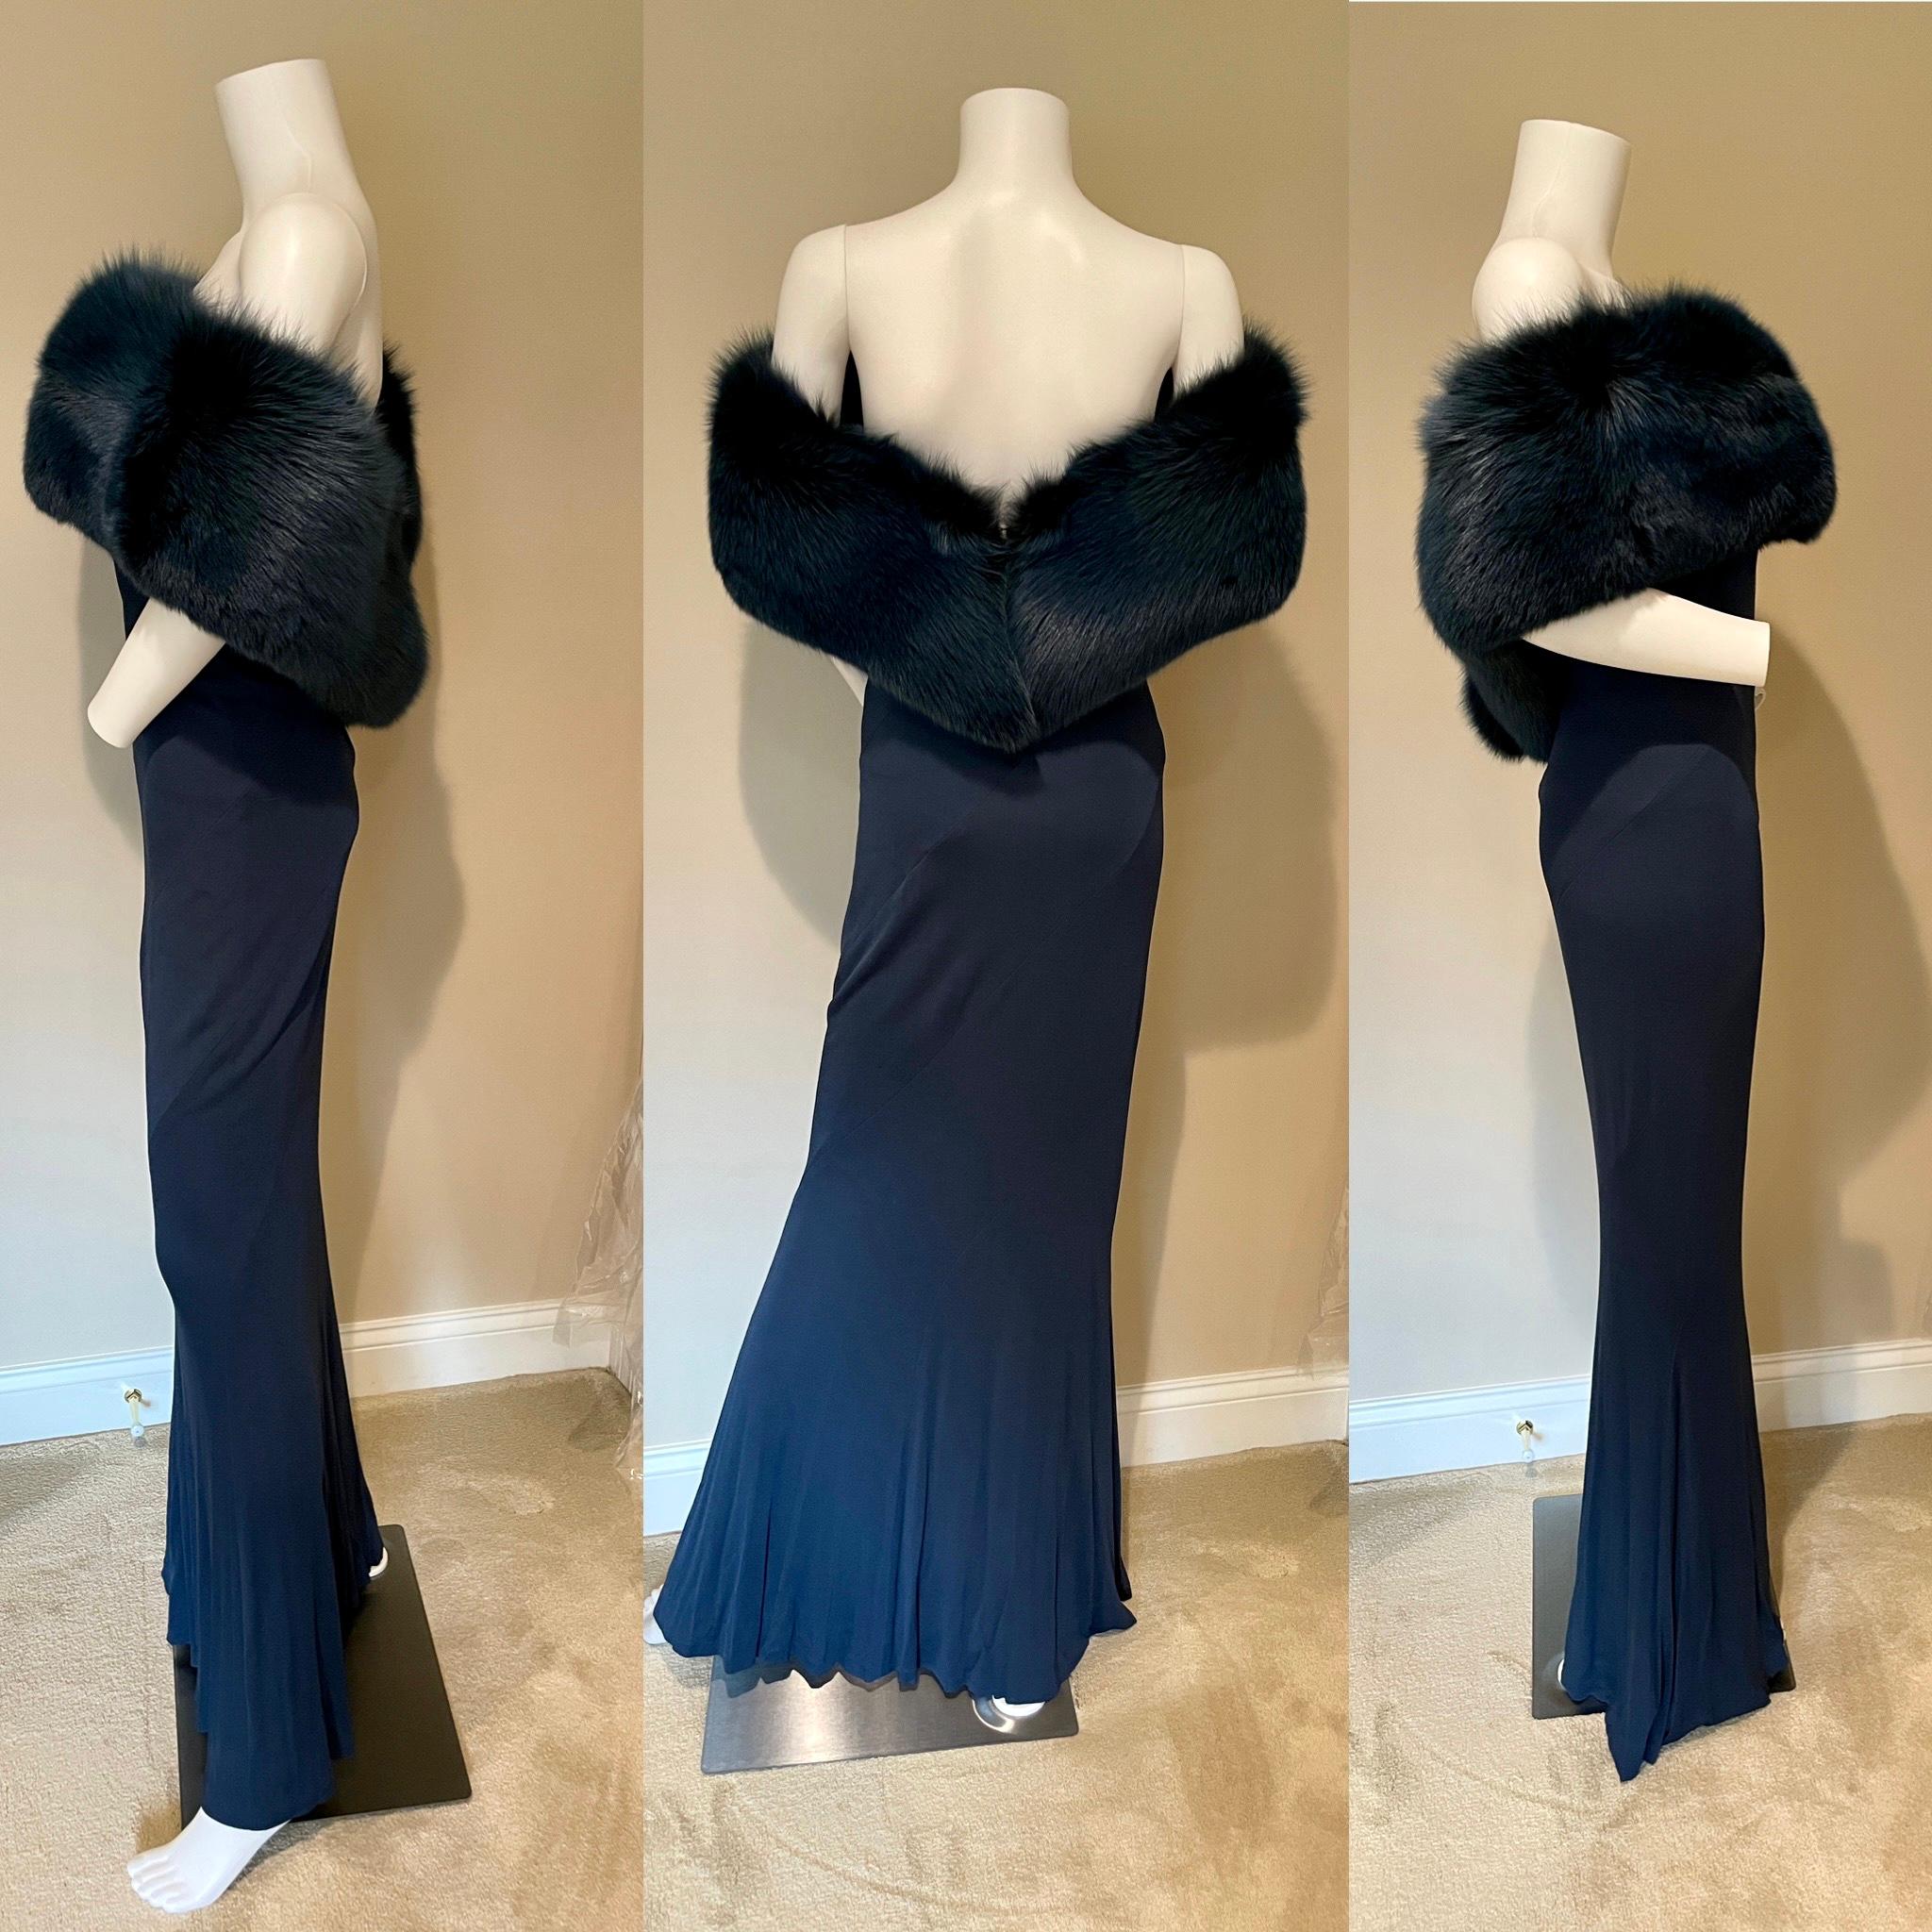 FW99 runway Vintage Randolph Duke long navy blue maxi dress with huge (undetachable) fur stole. The composition tag is cut out, but it looks like a synthetic matte jersey material and dyed fox fur. The size label has also been cut out, but it looks